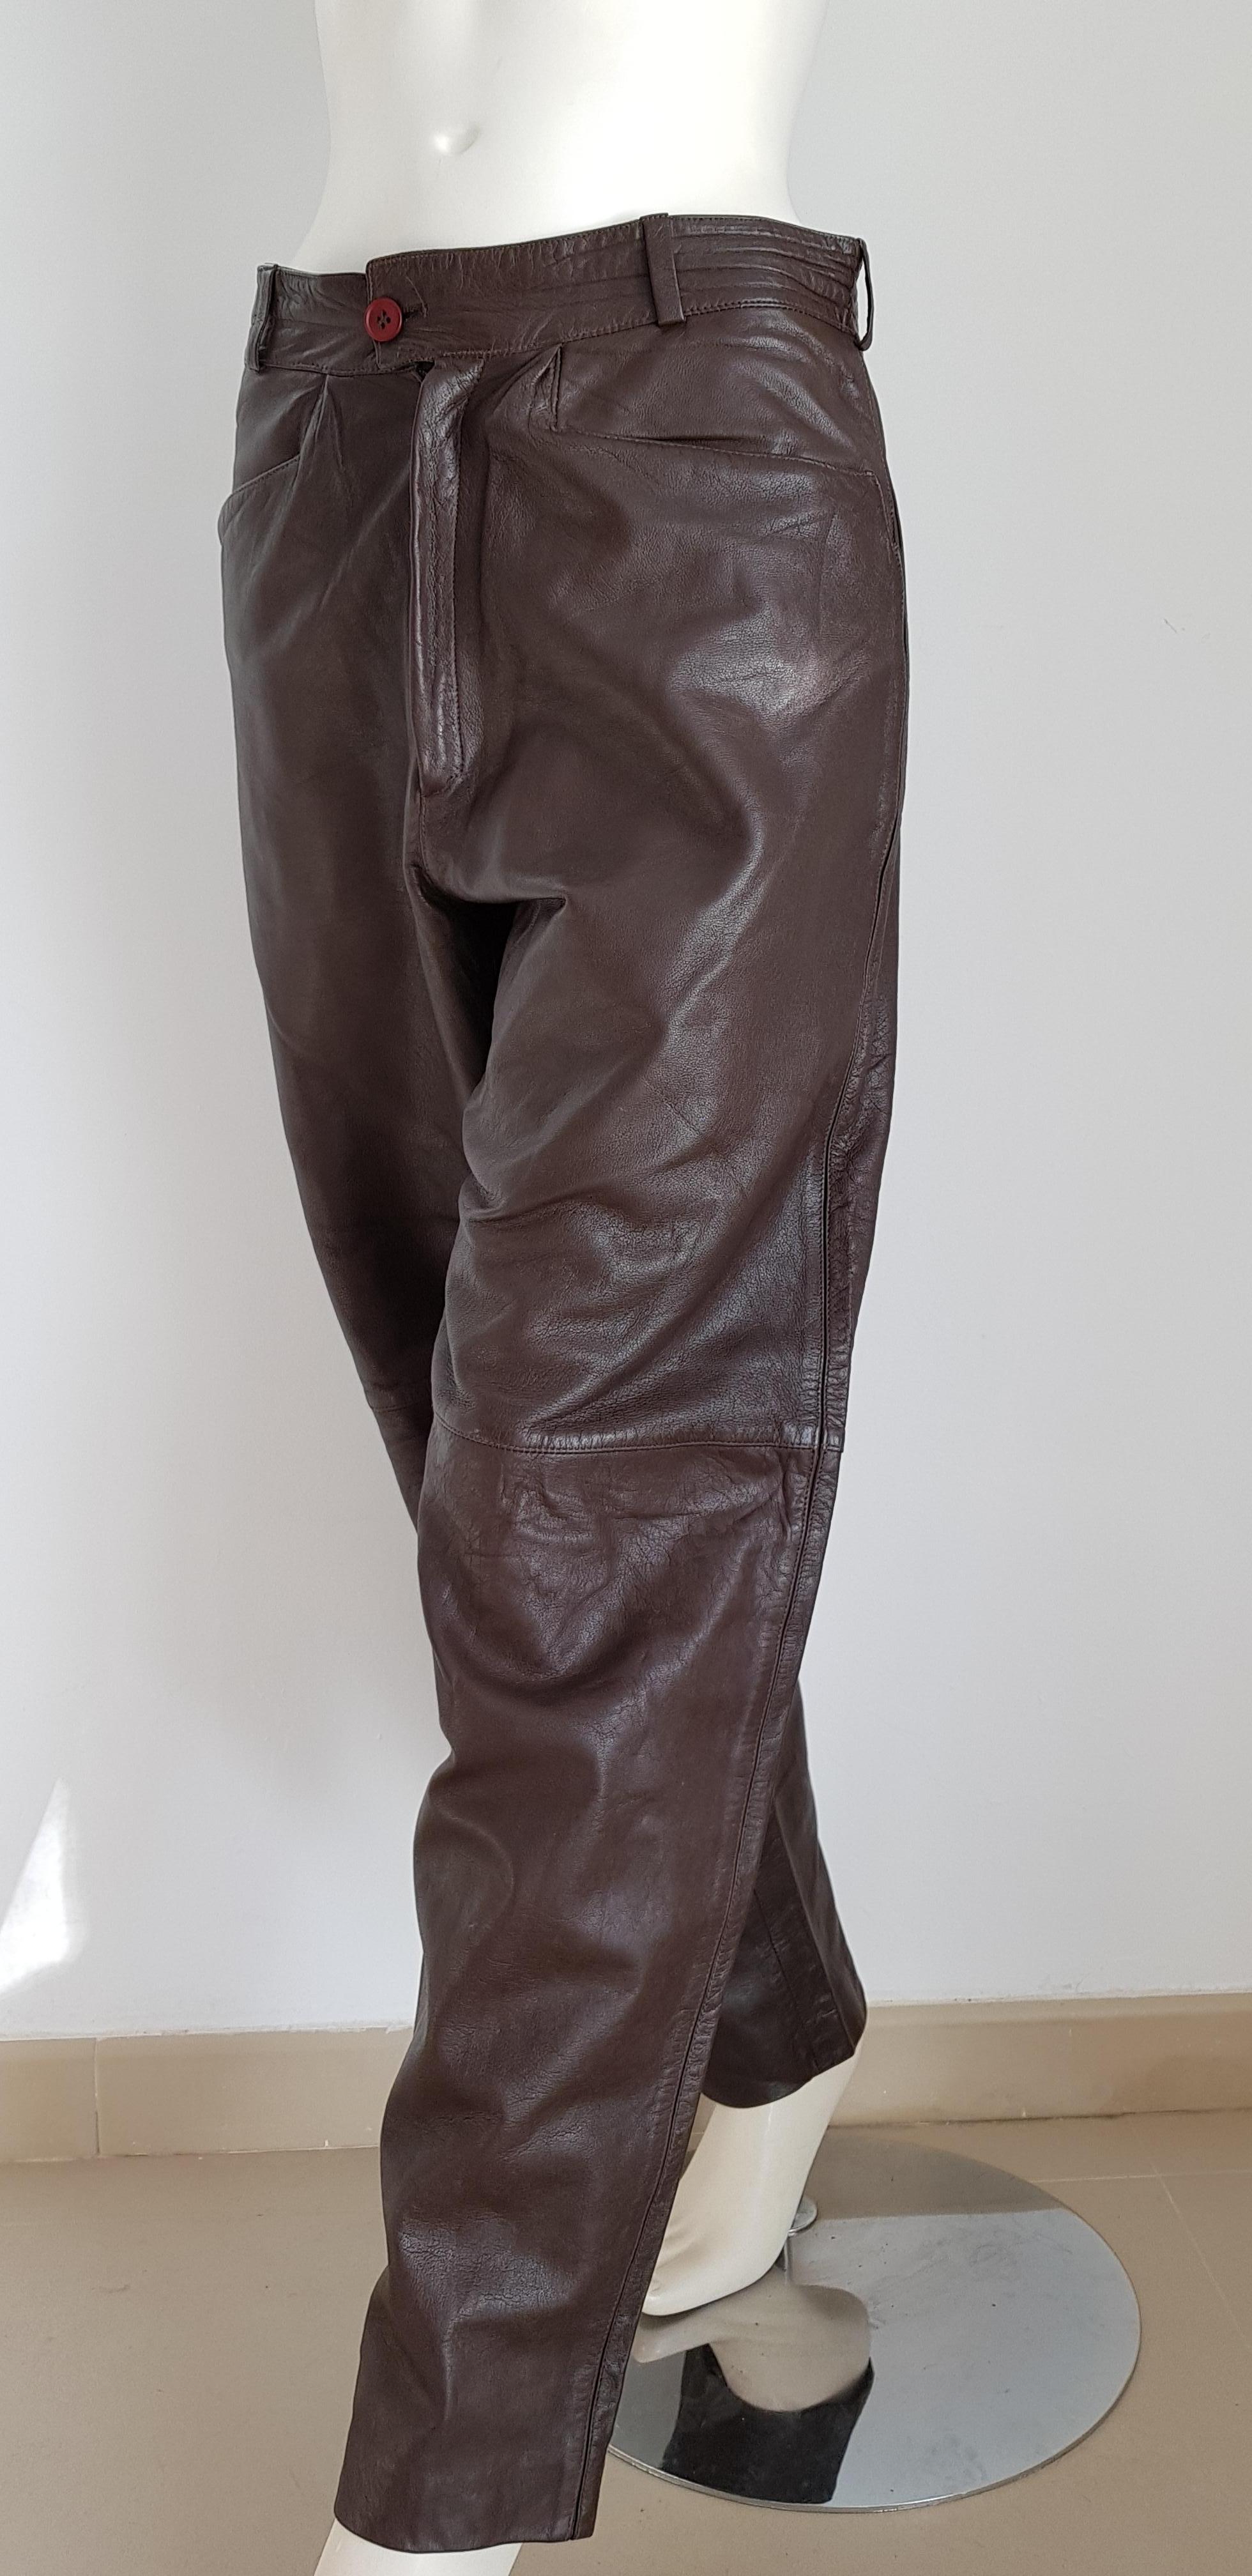 Gianni VERSACE men's unisex brown with light burgundy tone leather pants - Unworn, New.

SIZE: FR 44, IT 46, GB 38, D40 - see measures as below.
MEASURES: lenght 105, inseam length 77, waist circumference 82, hip circumference 104, leg hem